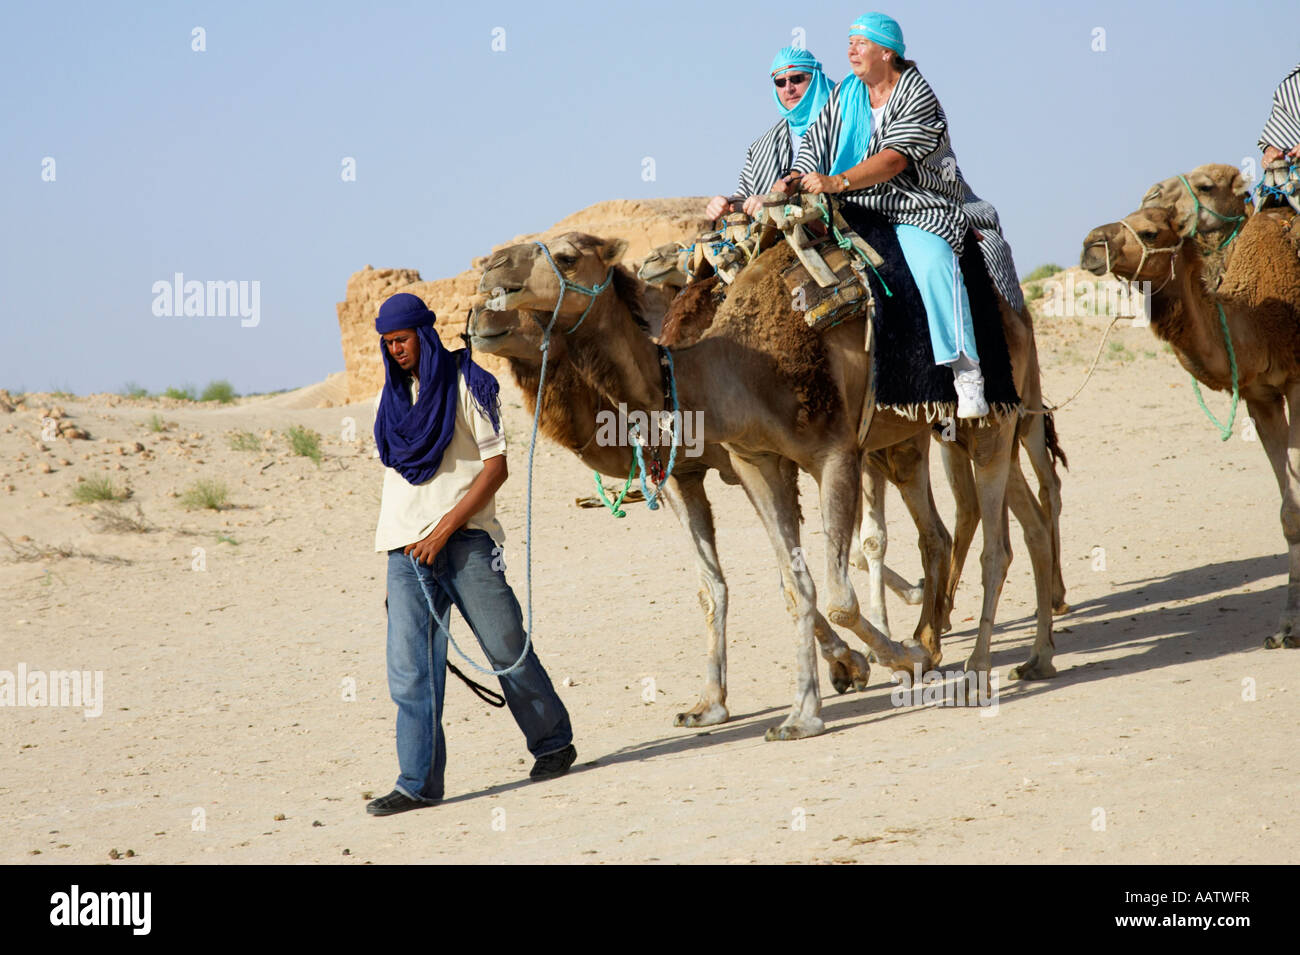 https://c8.alamy.com/comp/AATWFR/mrazig-guide-in-modern-clothing-leads-british-tourists-riding-camels-AATWFR.jpg